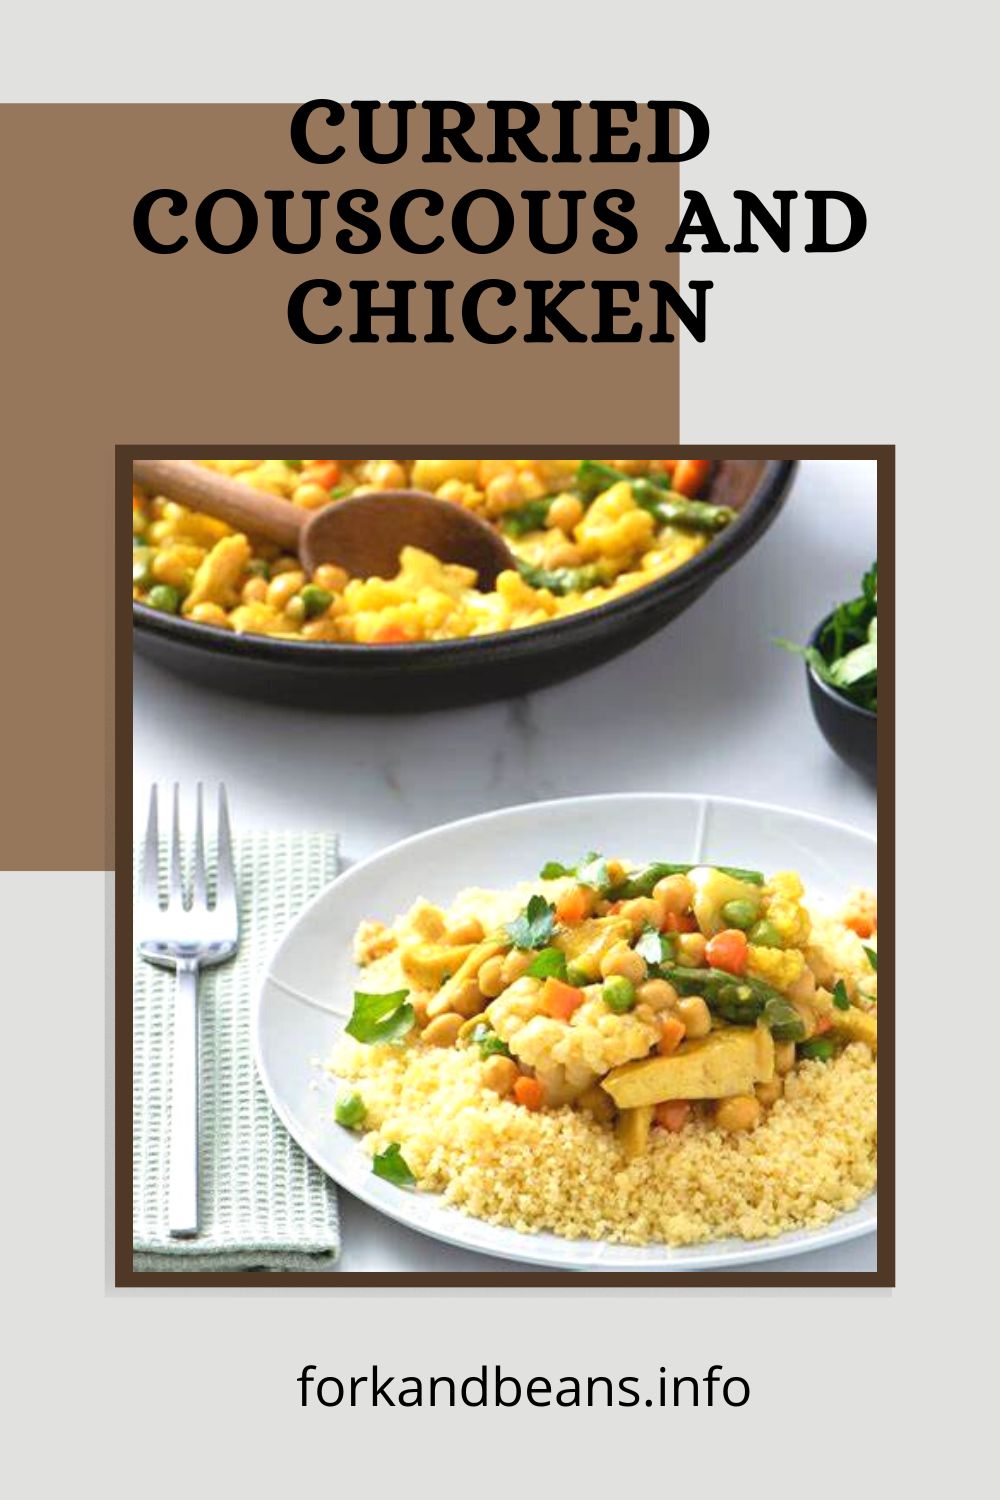 Recipe for Couscous and Curried Chicken